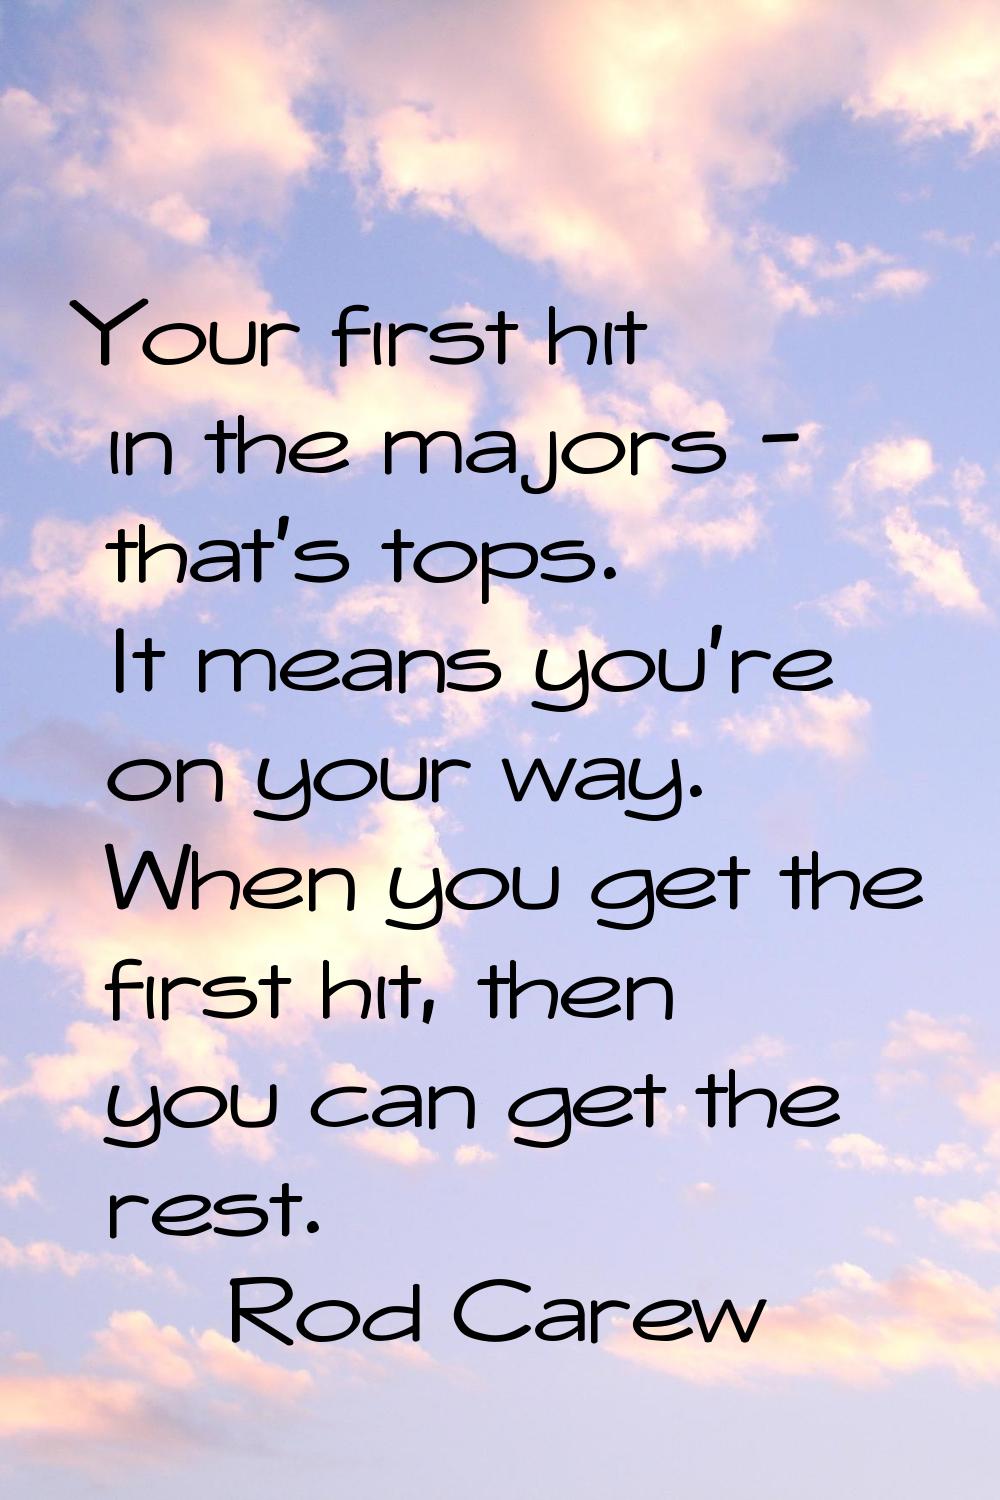 Your first hit in the majors - that's tops. It means you're on your way. When you get the first hit